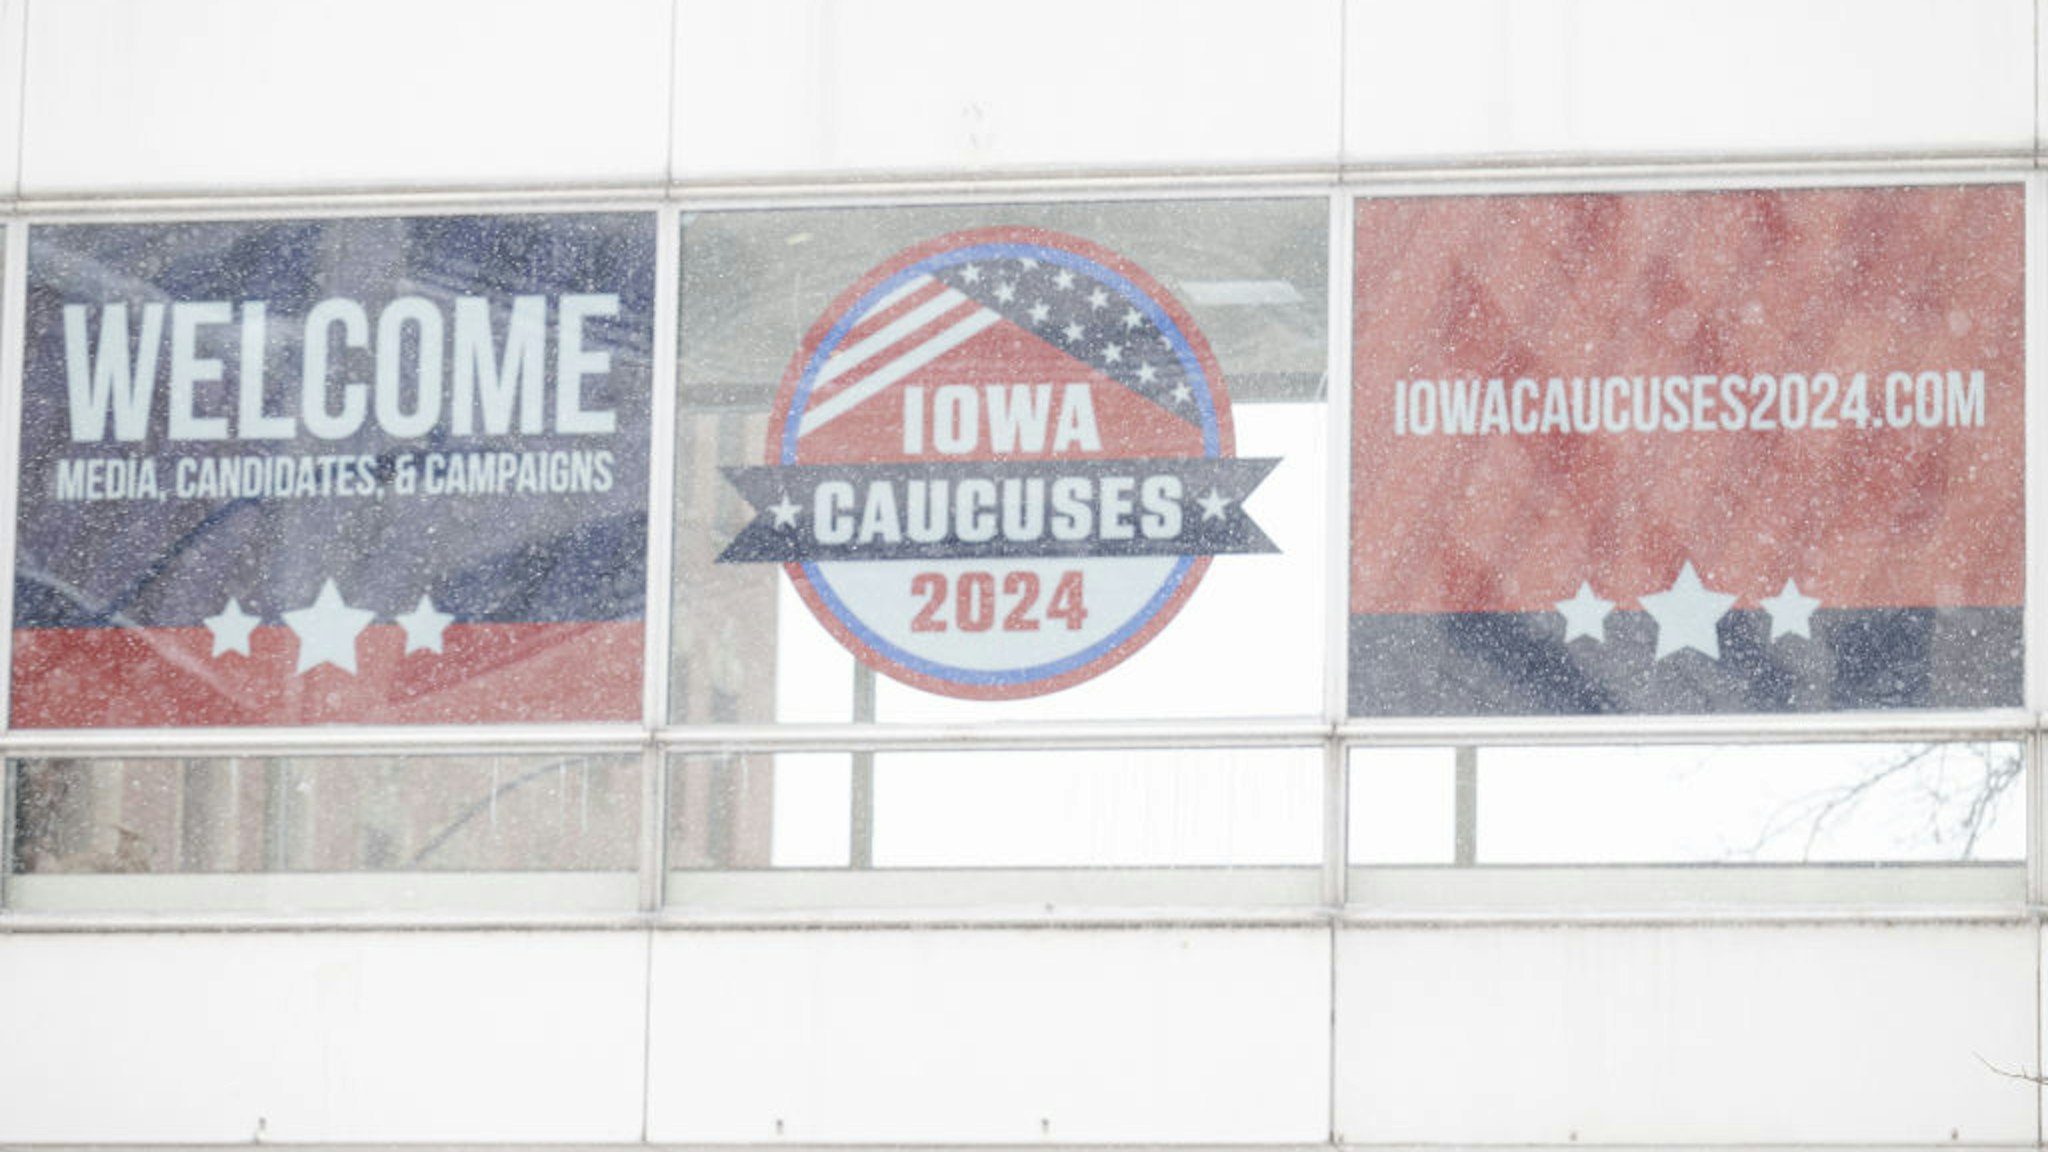 Signage ahead of the Iowa caucus in Des Moines, Iowa, US, on Friday, Jan. 12, 2024. The polar vortex is about to unleash an Arctic chill across much of the US this weekend, leaving football fans shivering in the Midwest and inflicting subzero temperatures on Iowa voters just before the state's caucus begins.